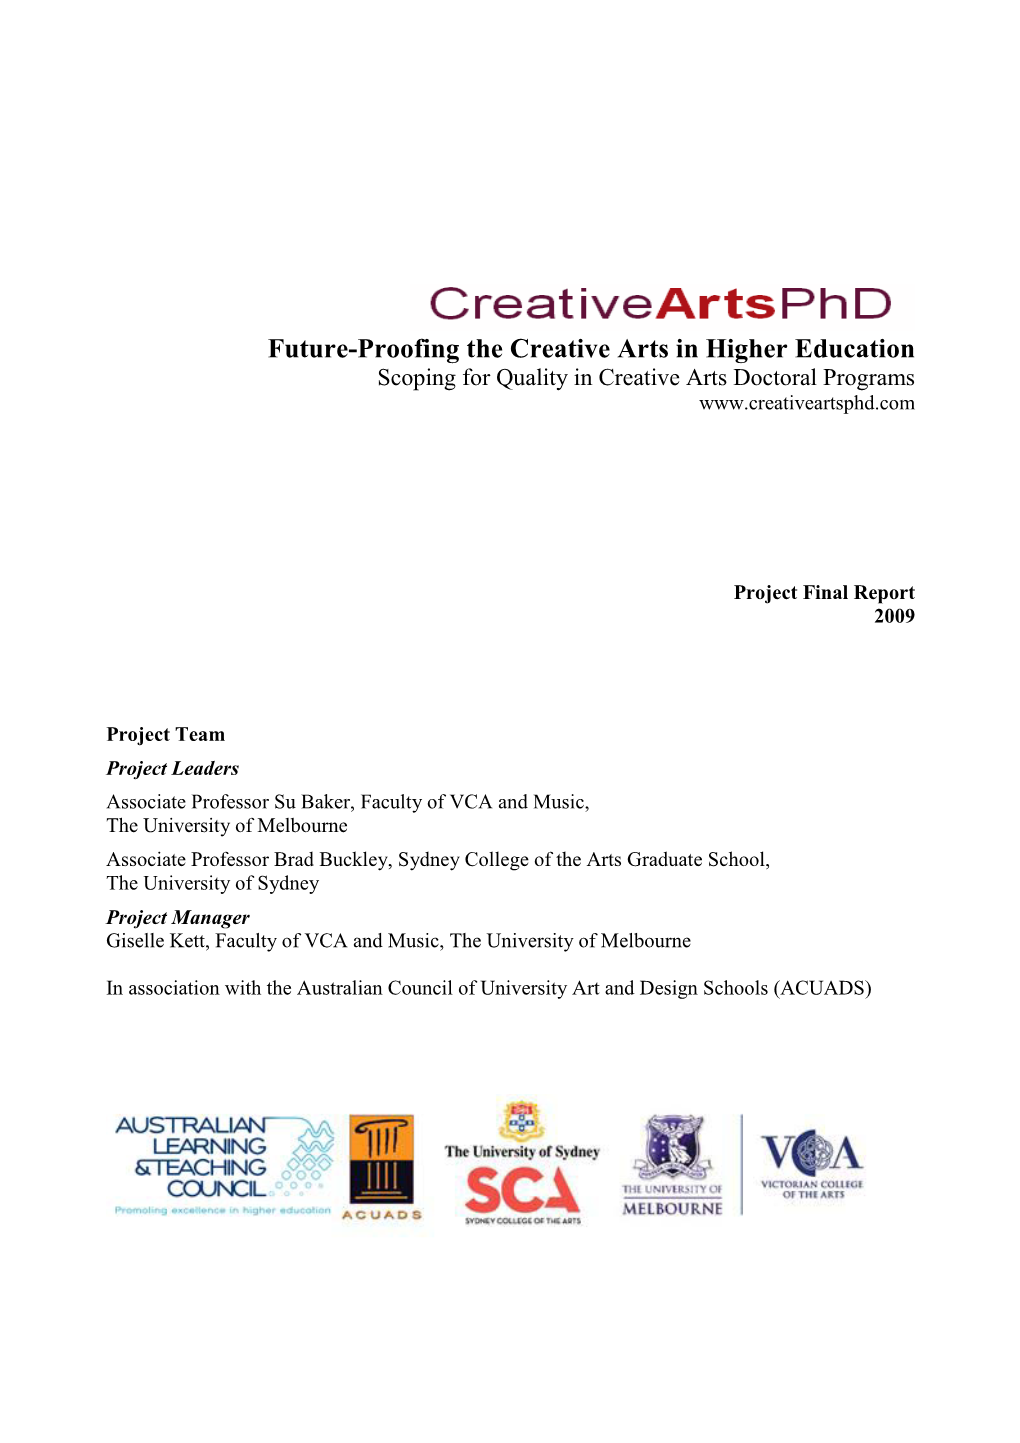 Future-Proofing the Creative Arts in Higher Education Scoping for Quality in Creative Arts Doctoral Programs